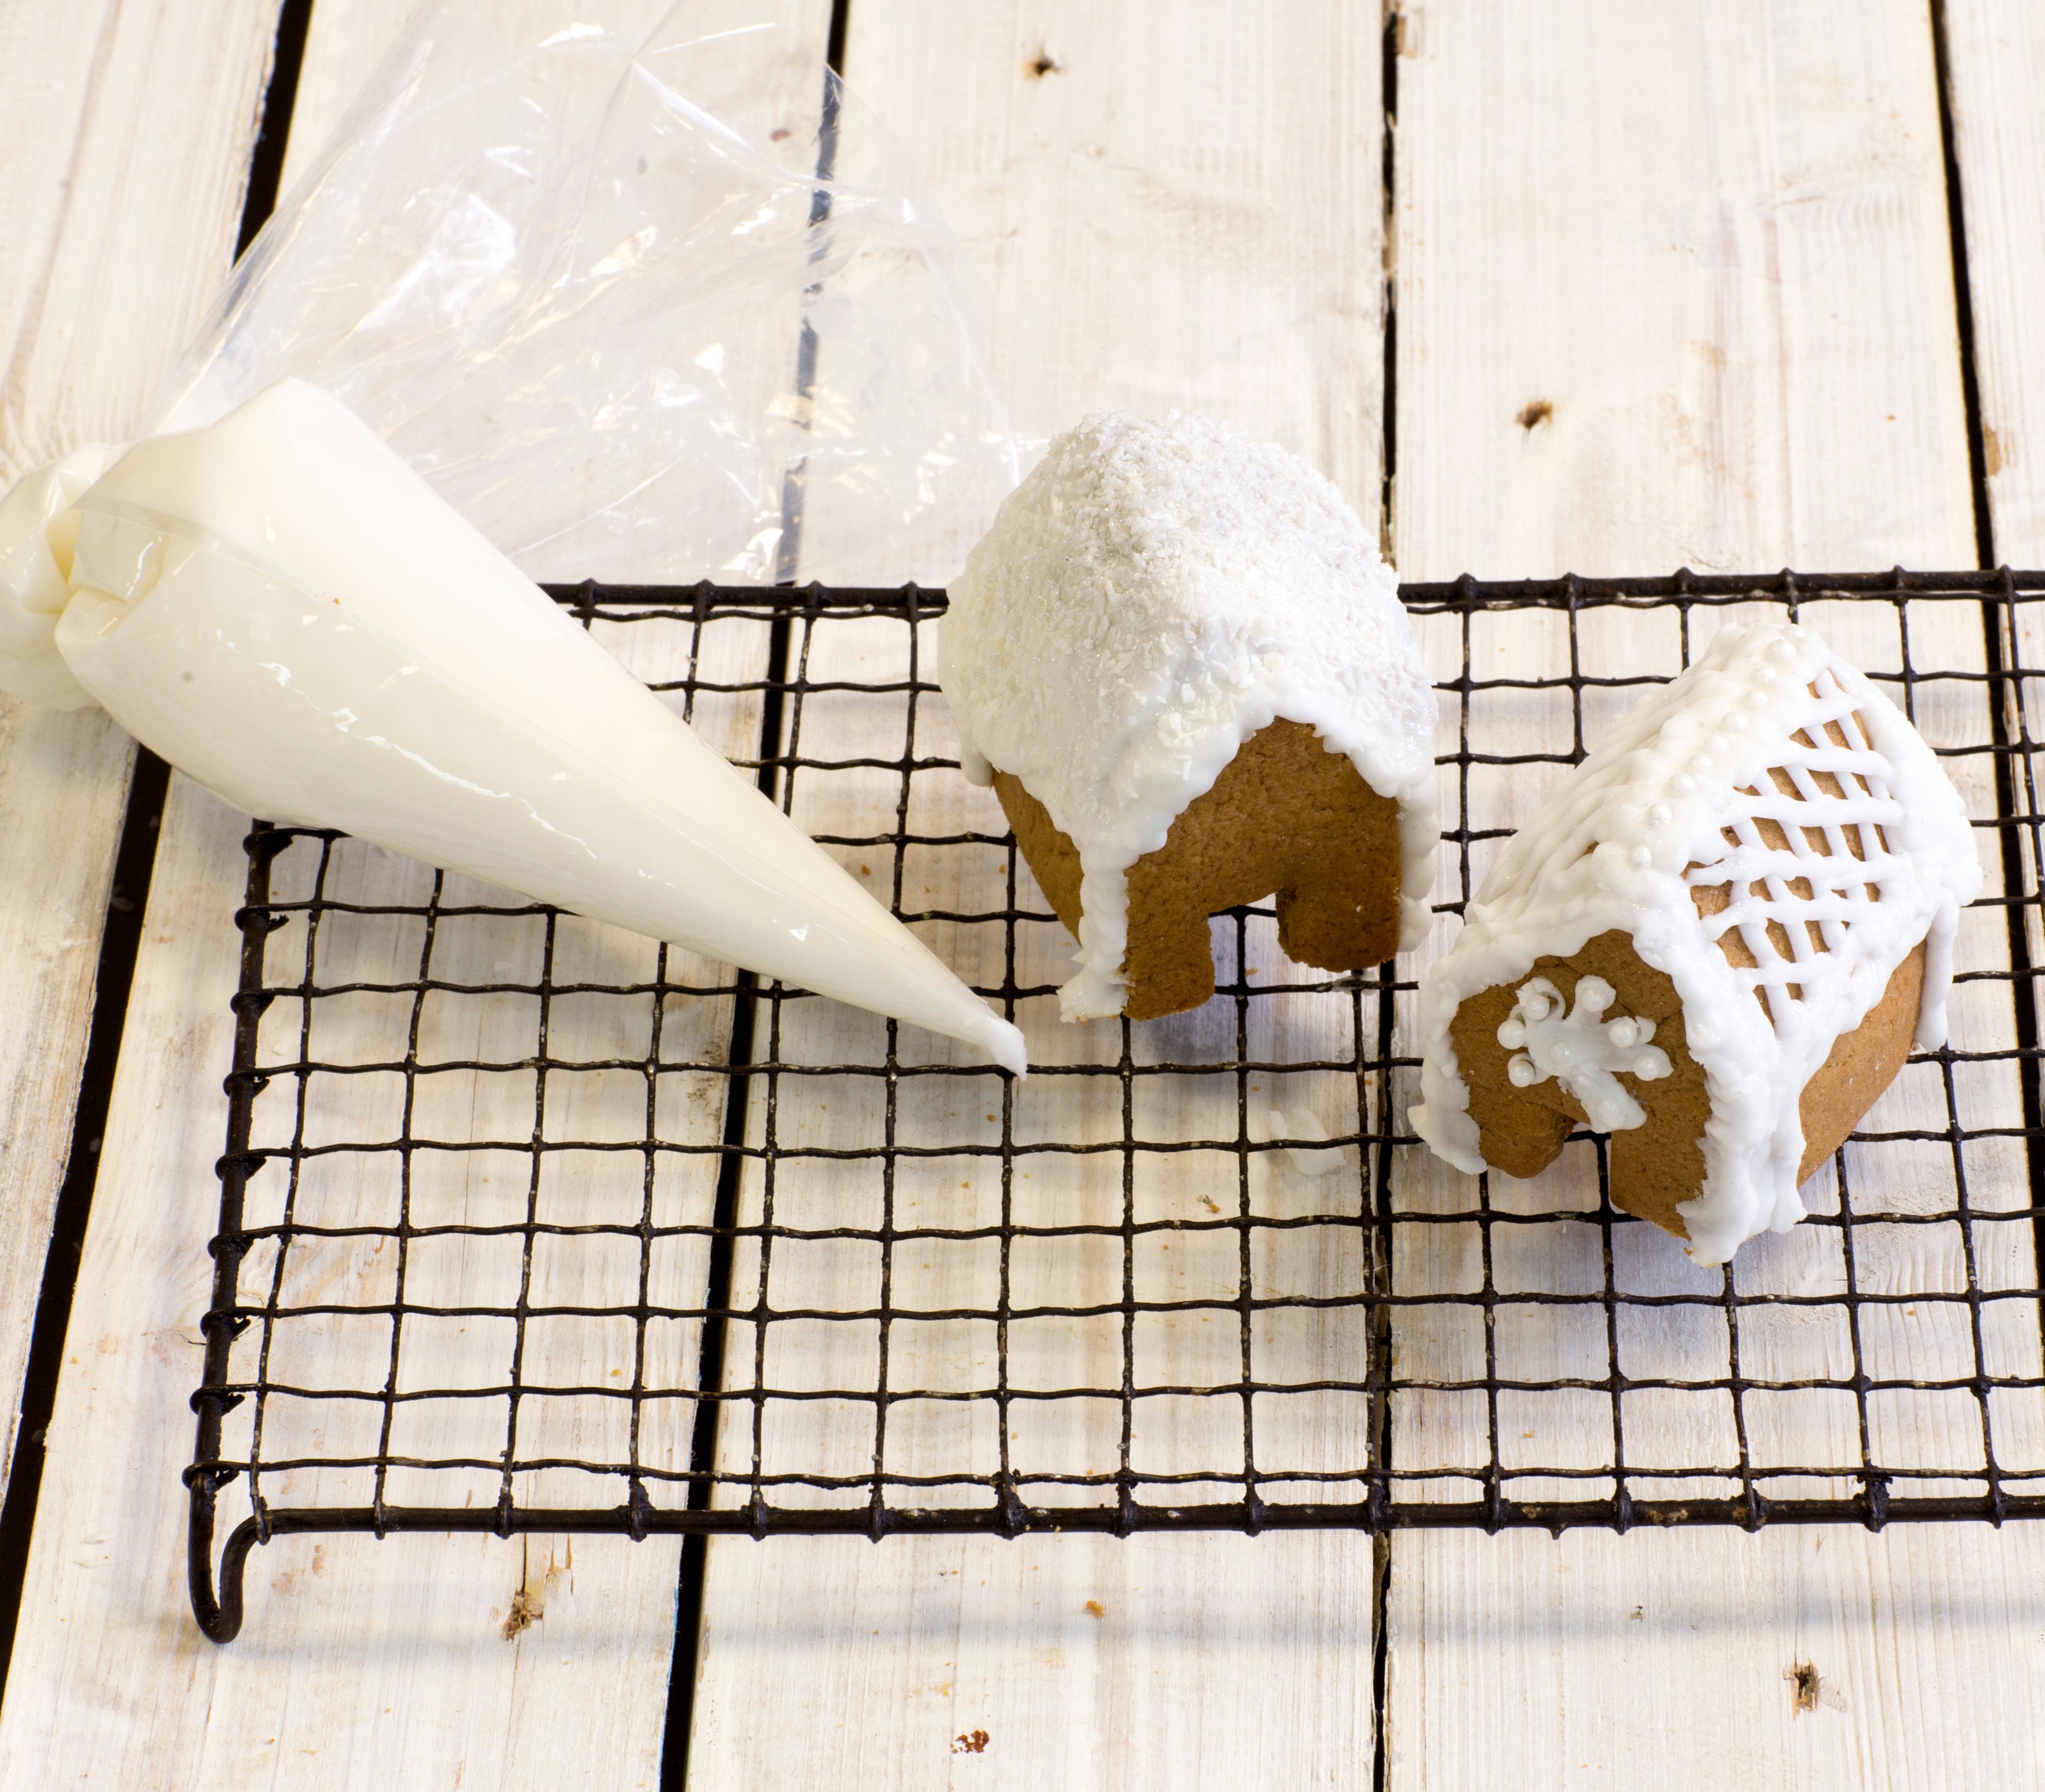 Gingerbread house construction with icing bag on cooling rack